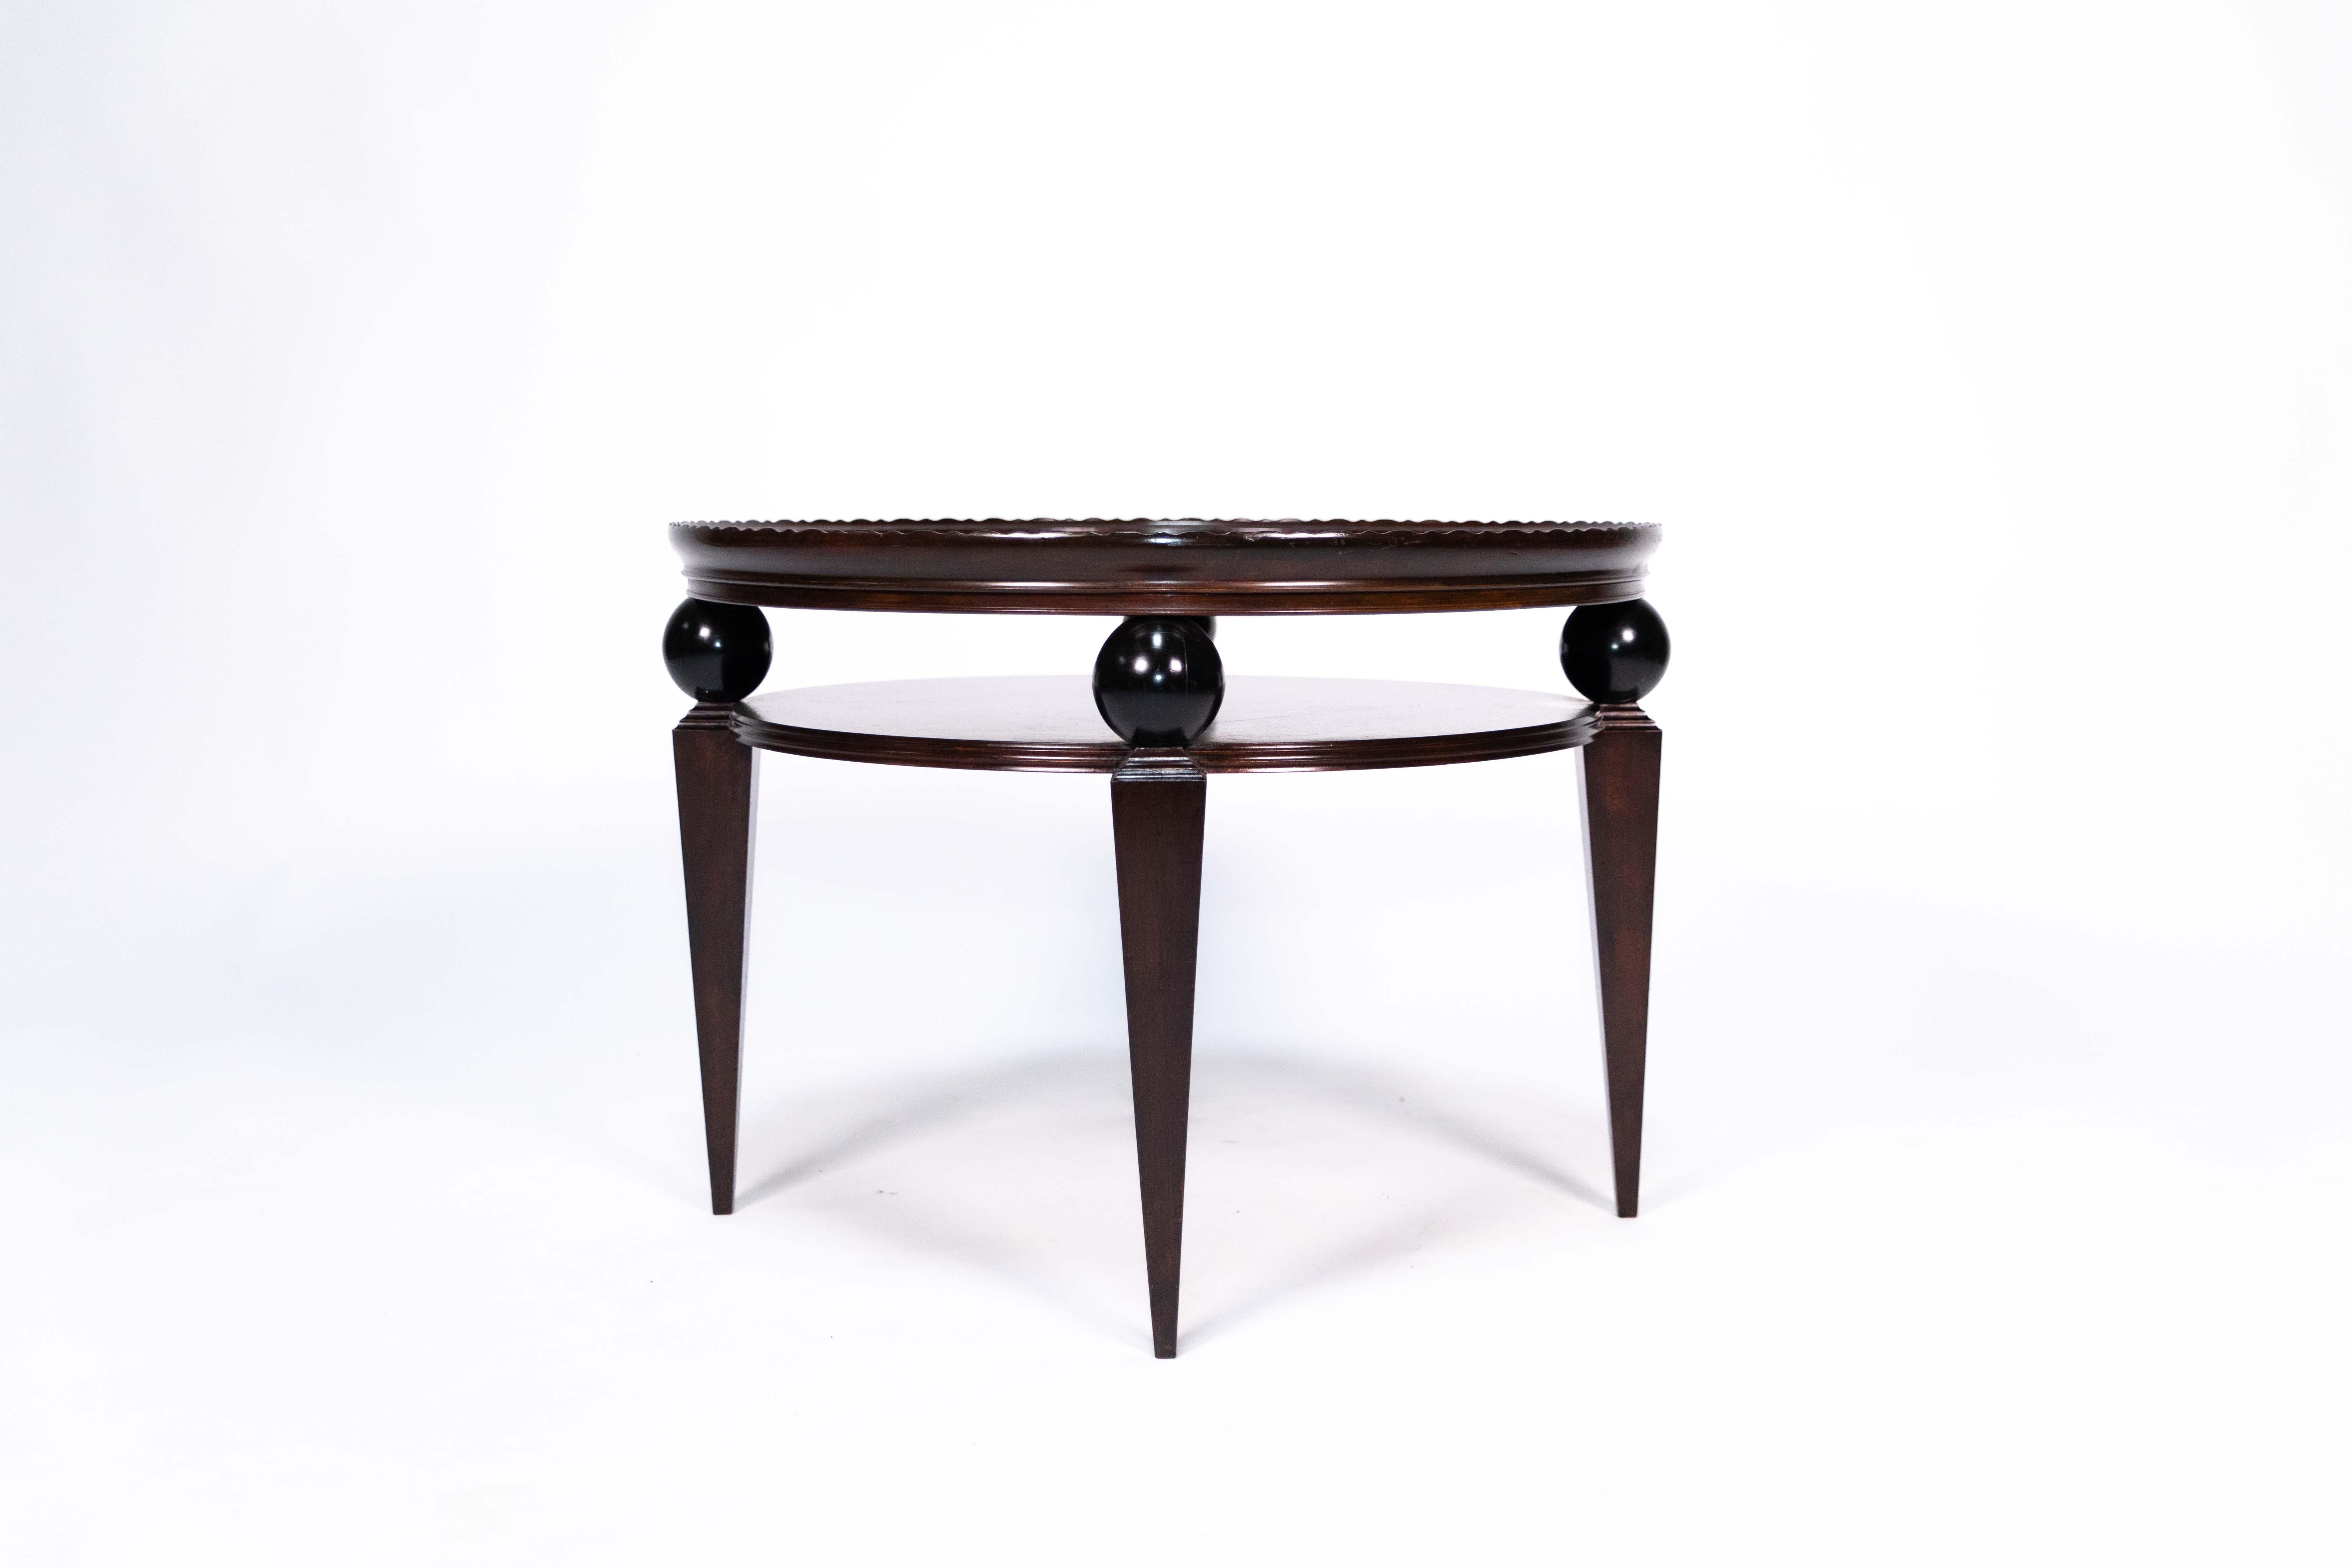 German Expressive Coffee Table, Attributed to Dr. Oskar Wlach, 1923 For Sale